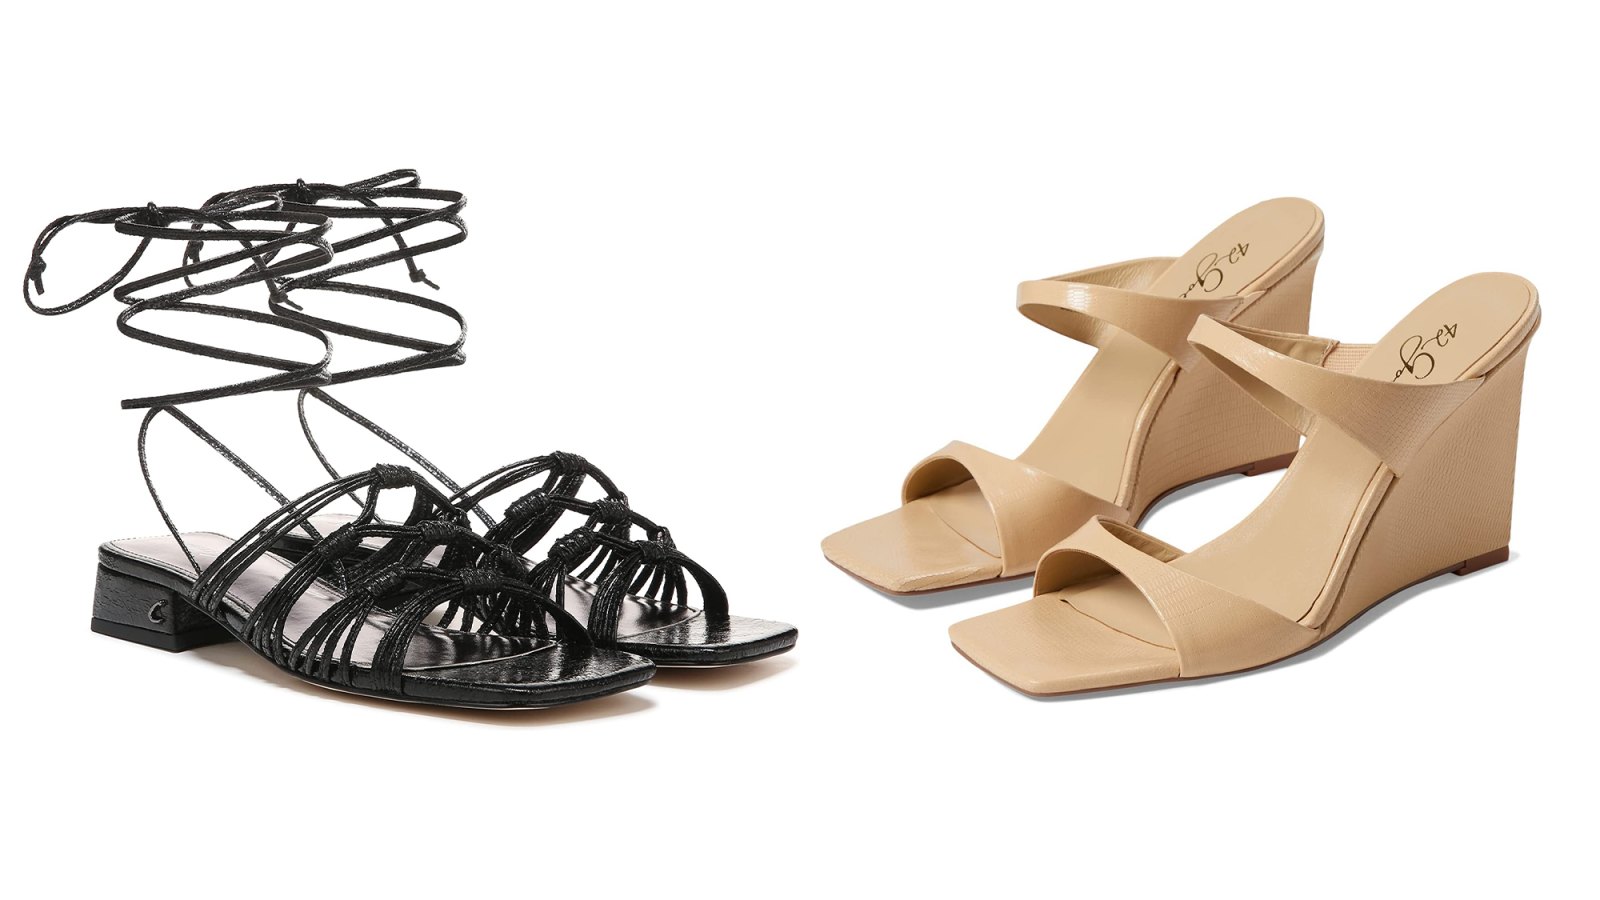 Zappos-Spring-Sandal-Trends-Featured-Image